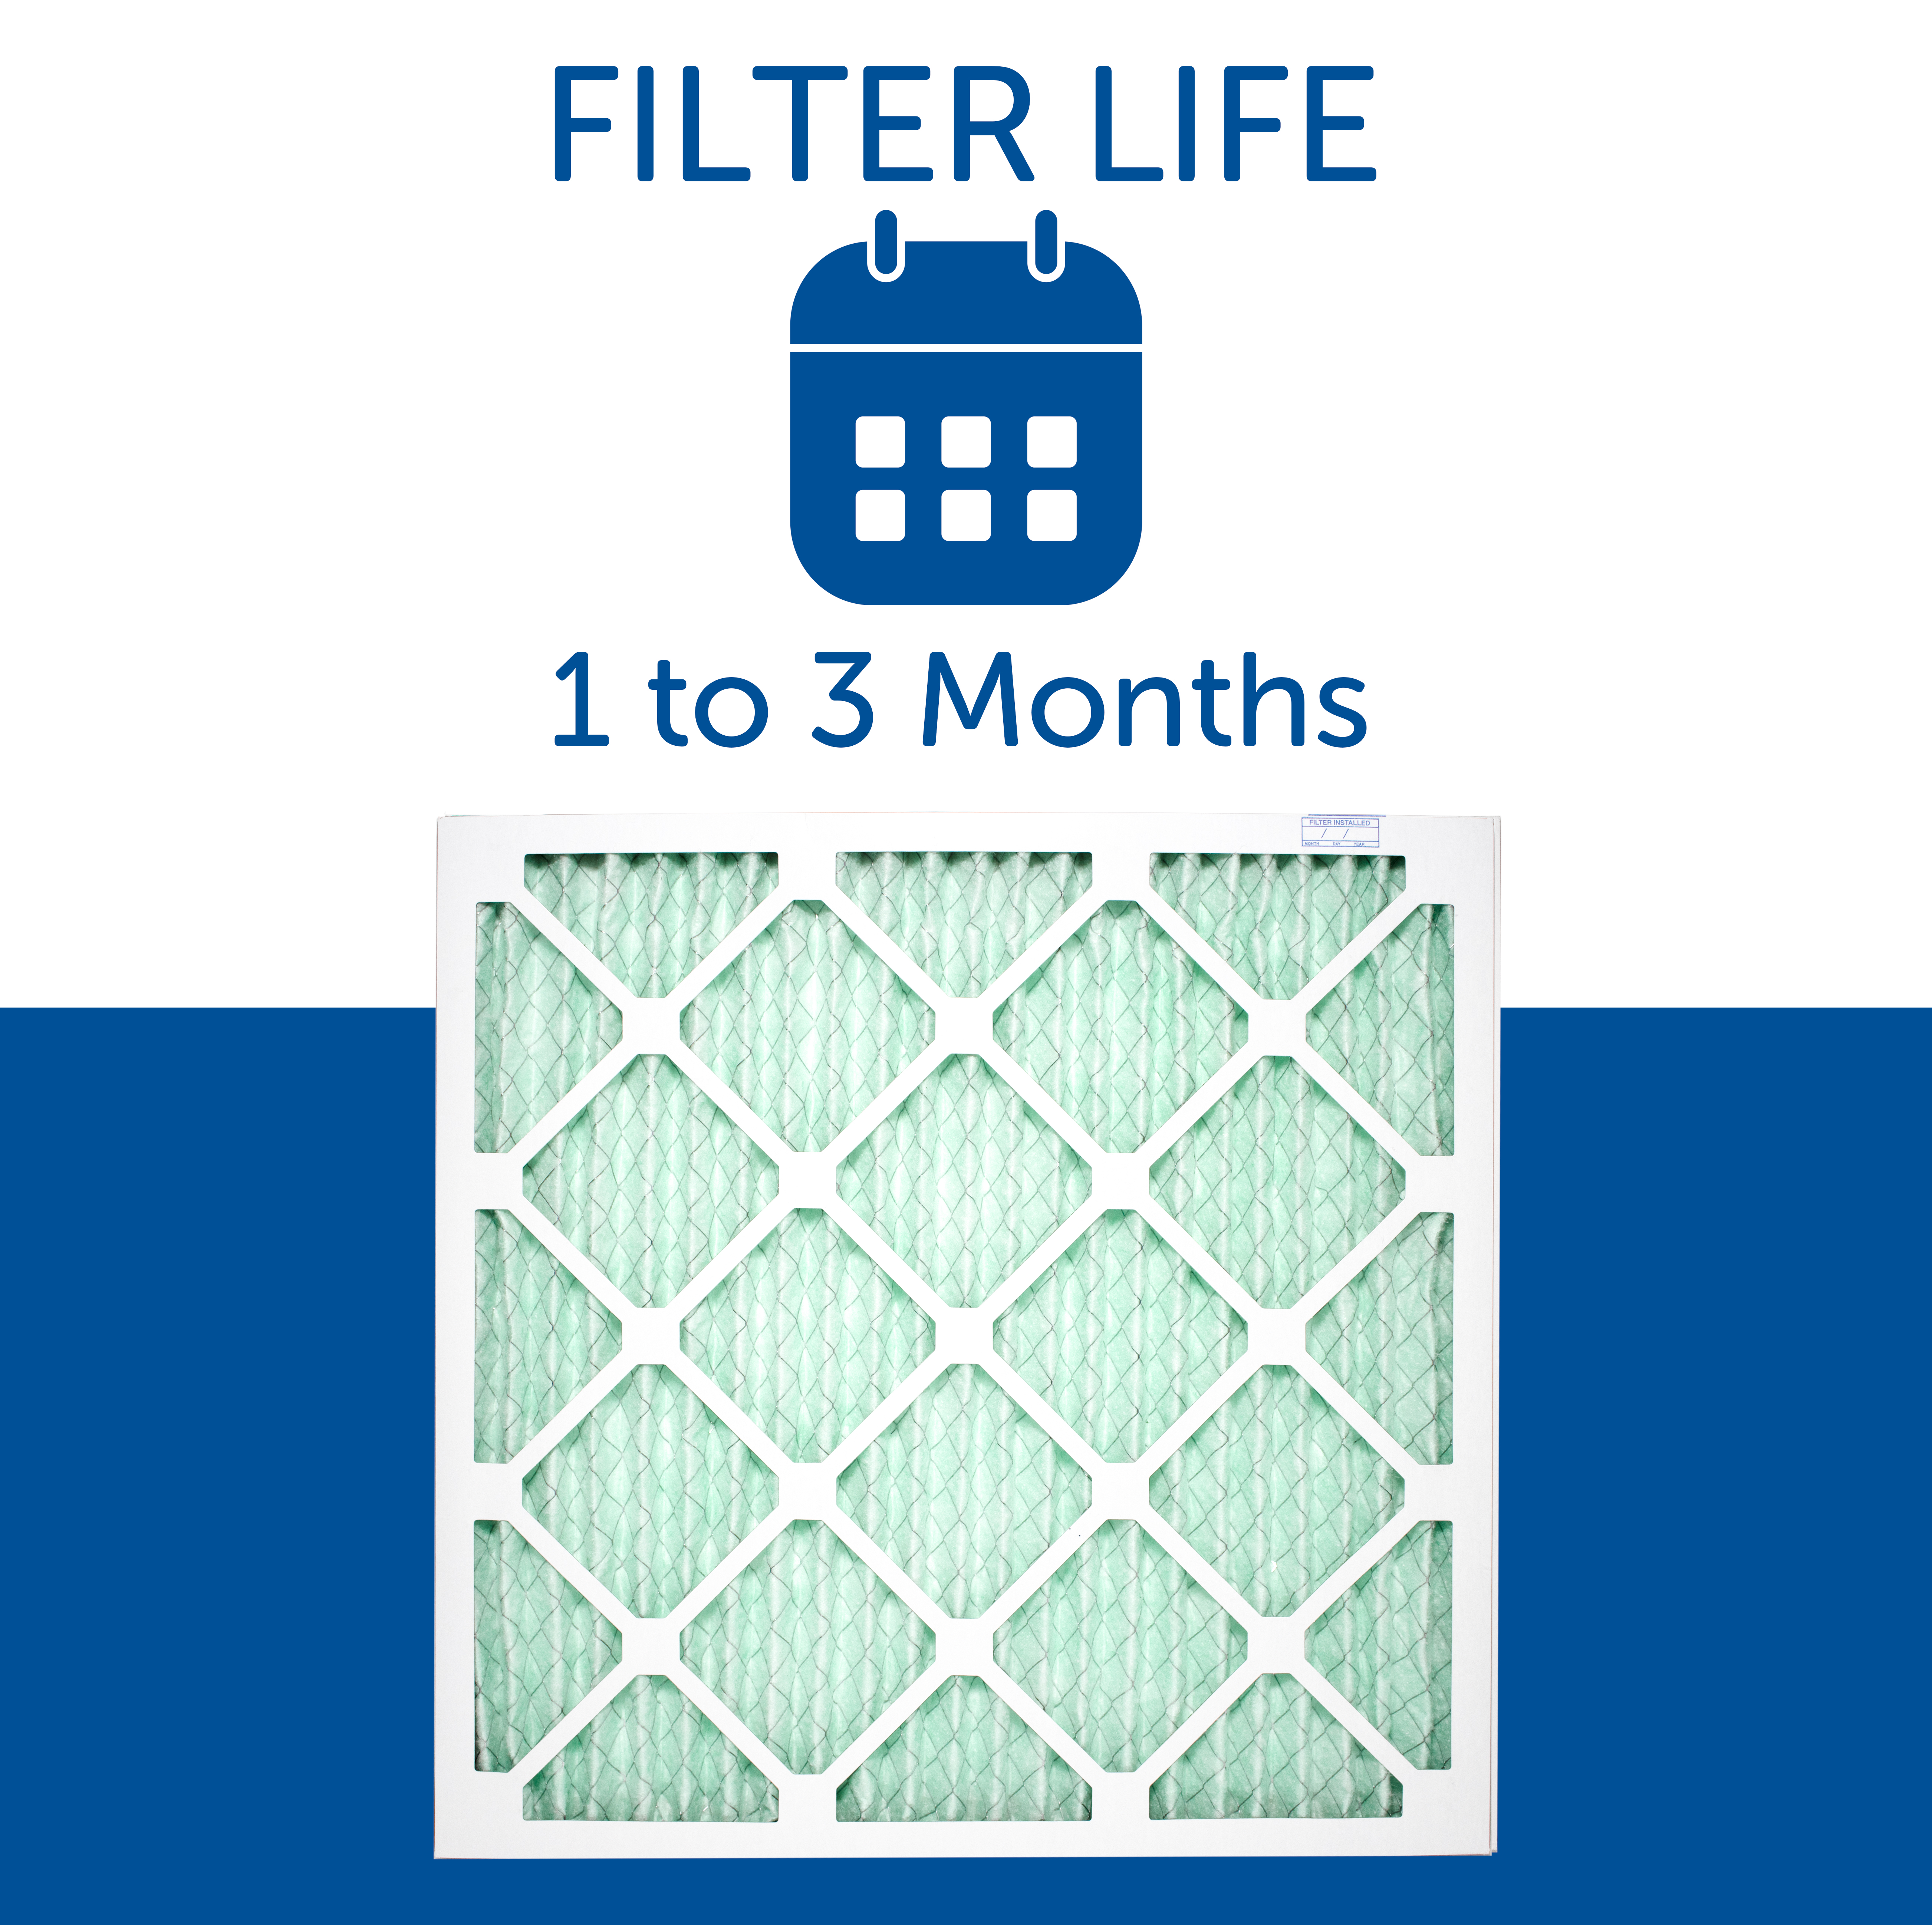 1" MERV 13 Furnace & AC Air Filter by Filters Fast&reg; - 6-Pack